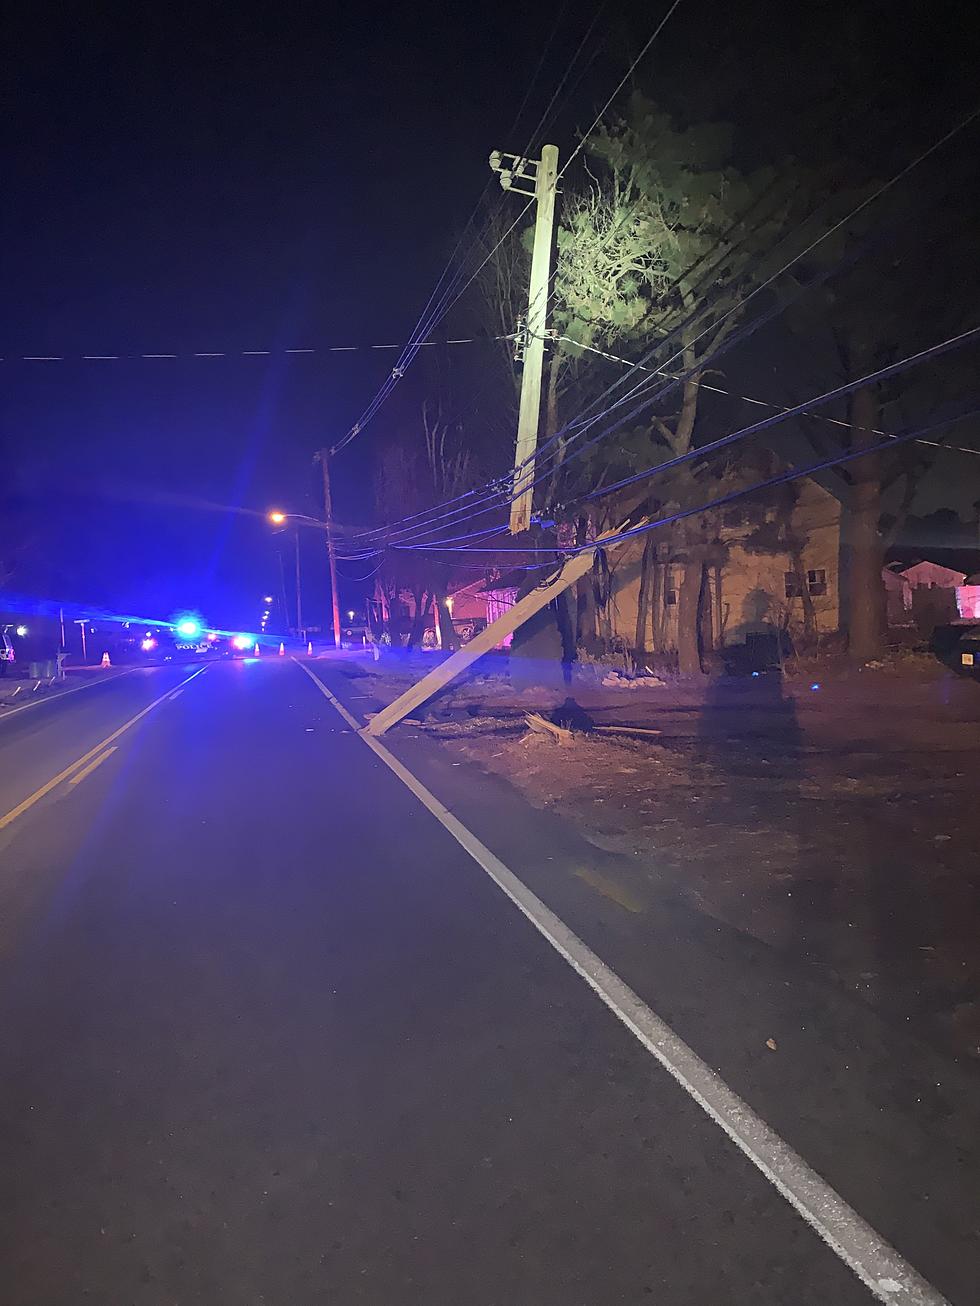 Manchester, NJ Police searching for hit-and-run driver that struck utilty pole